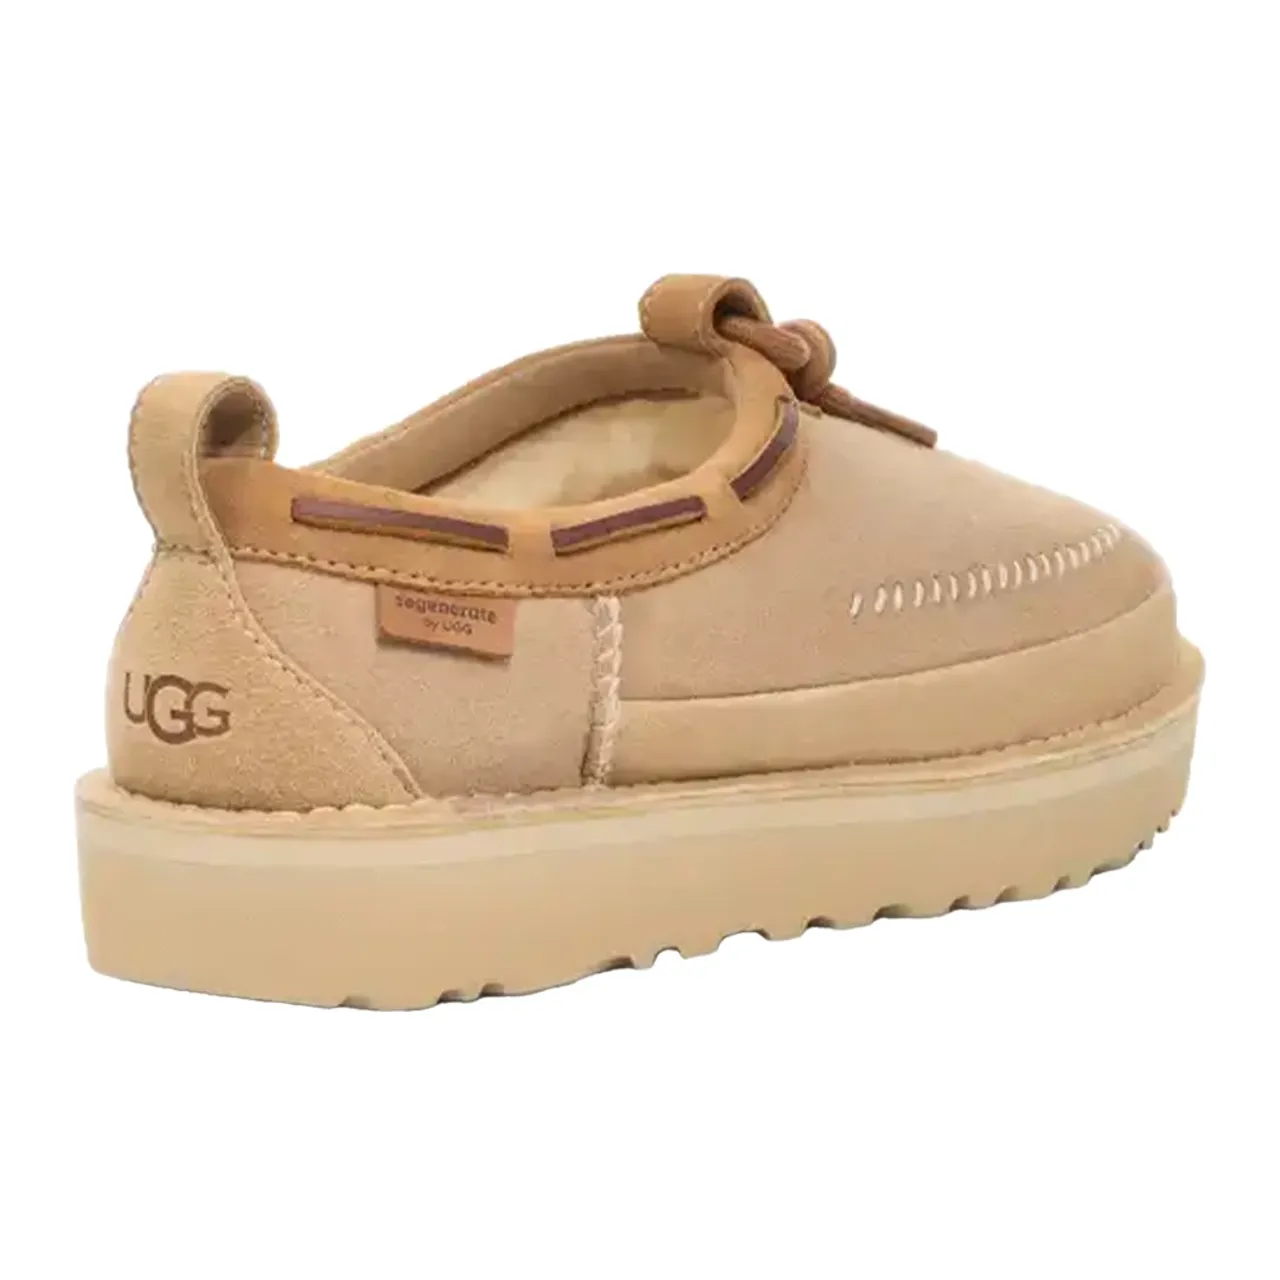 UGG , Regenerate Crafted Slippers Sand ,Beige female, Sizes: